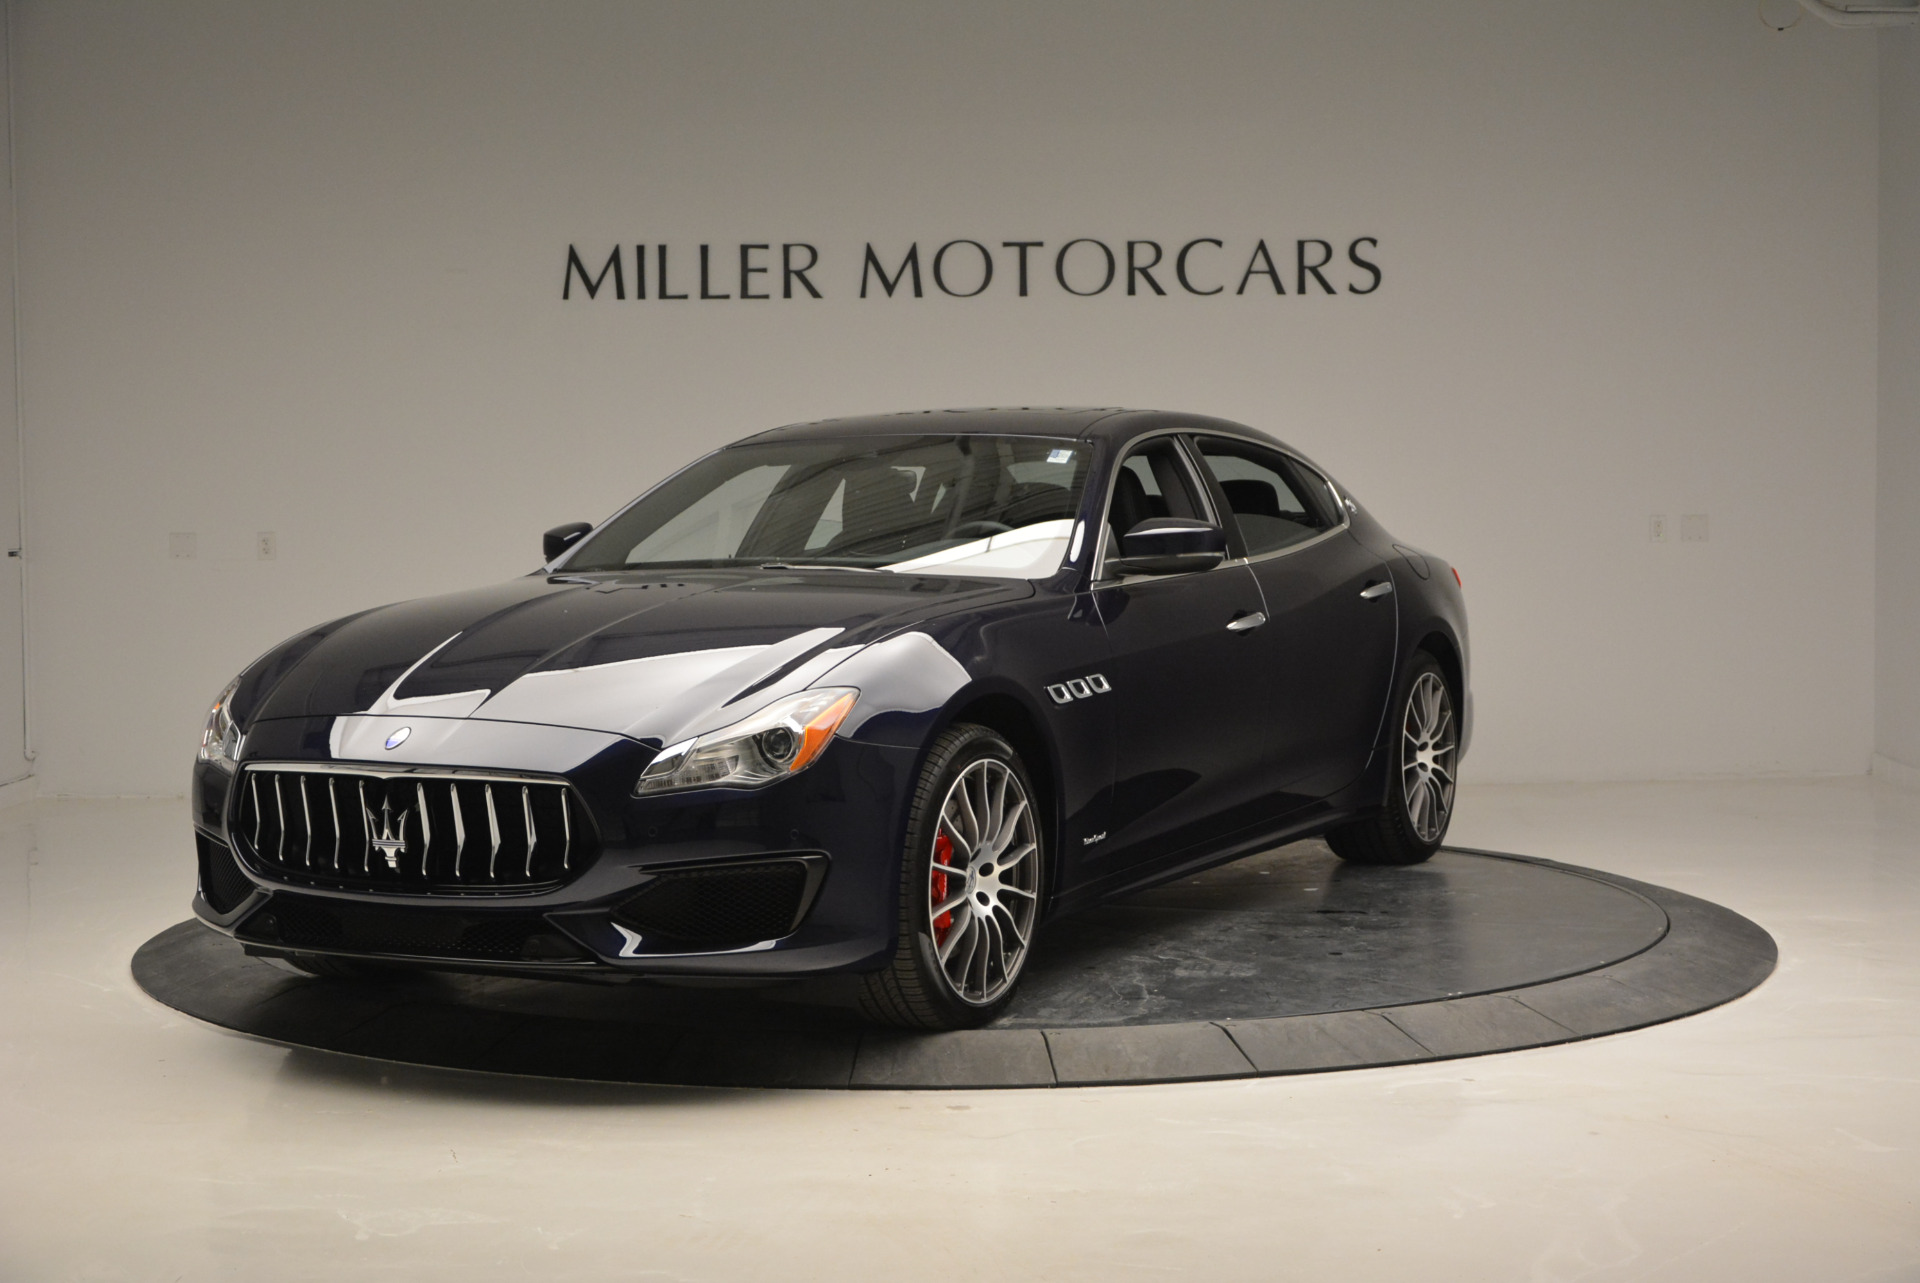 New 2017 Maserati Quattroporte S Q4 GranSport for sale Sold at Bentley Greenwich in Greenwich CT 06830 1